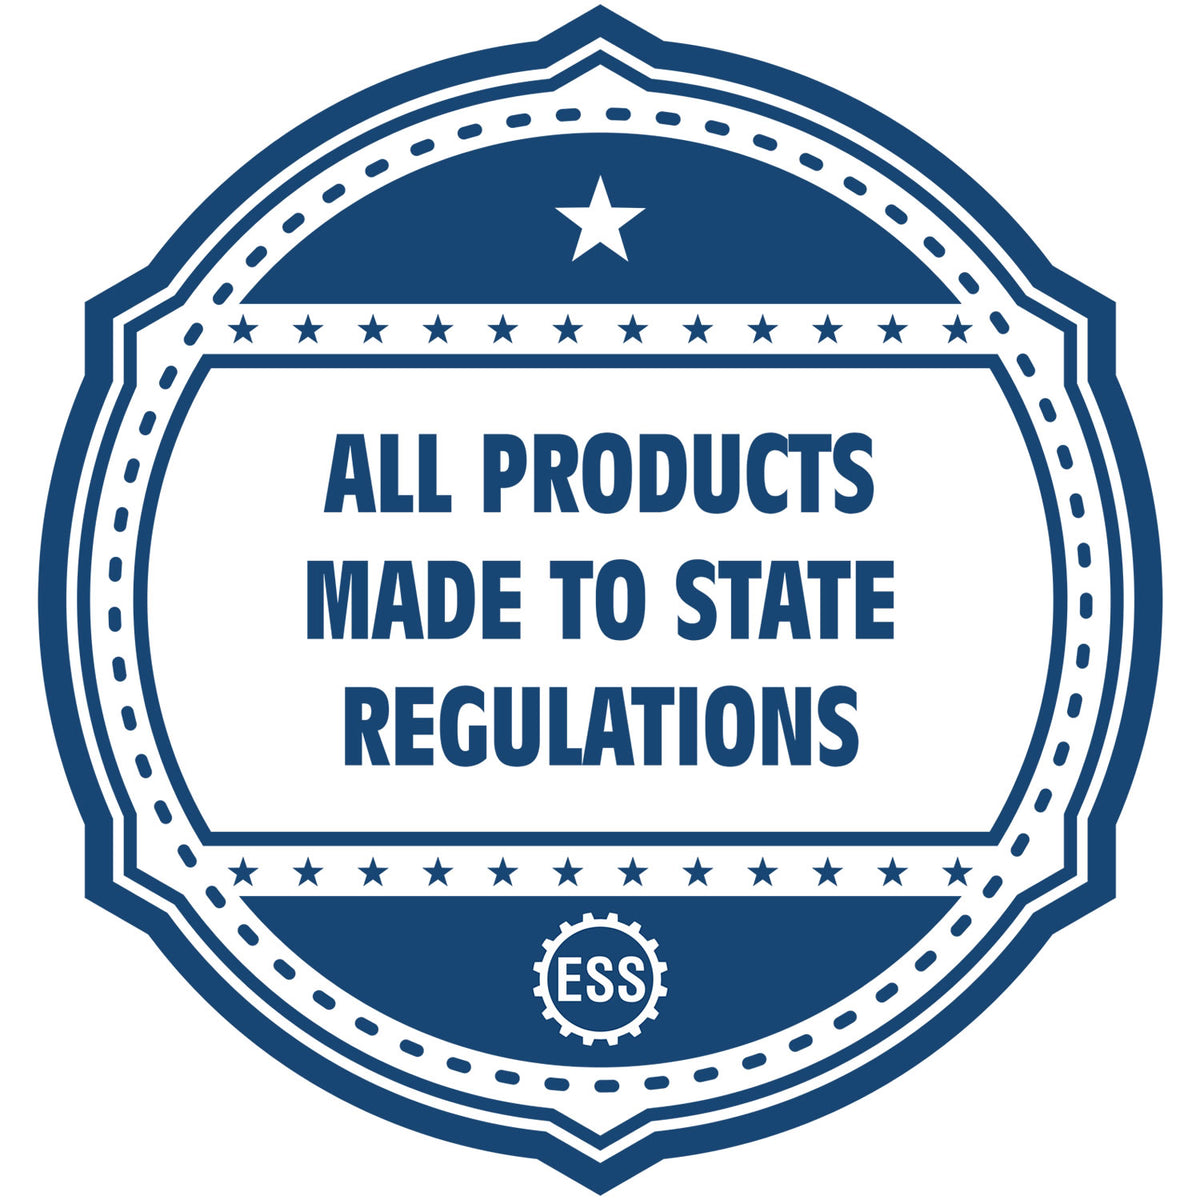 An icon or badge element for the State of New Mexico Extended Long Reach Engineer Seal showing that this product is made in compliance with state regulations.